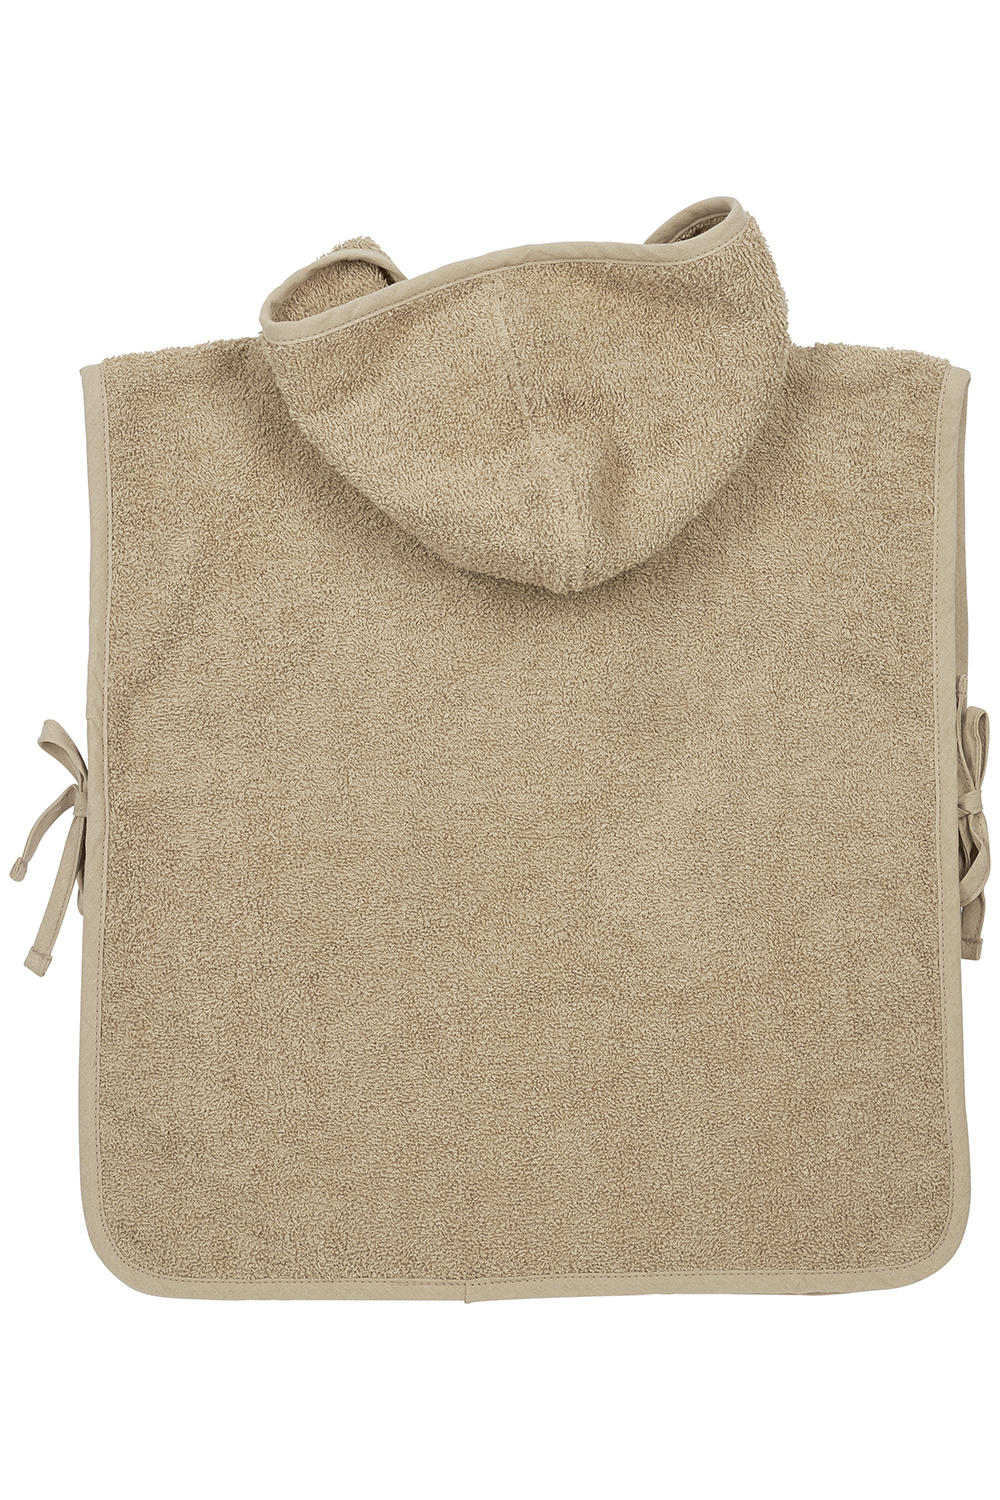 Badeponcho frottee Uni - sand - 1-3 Jahre